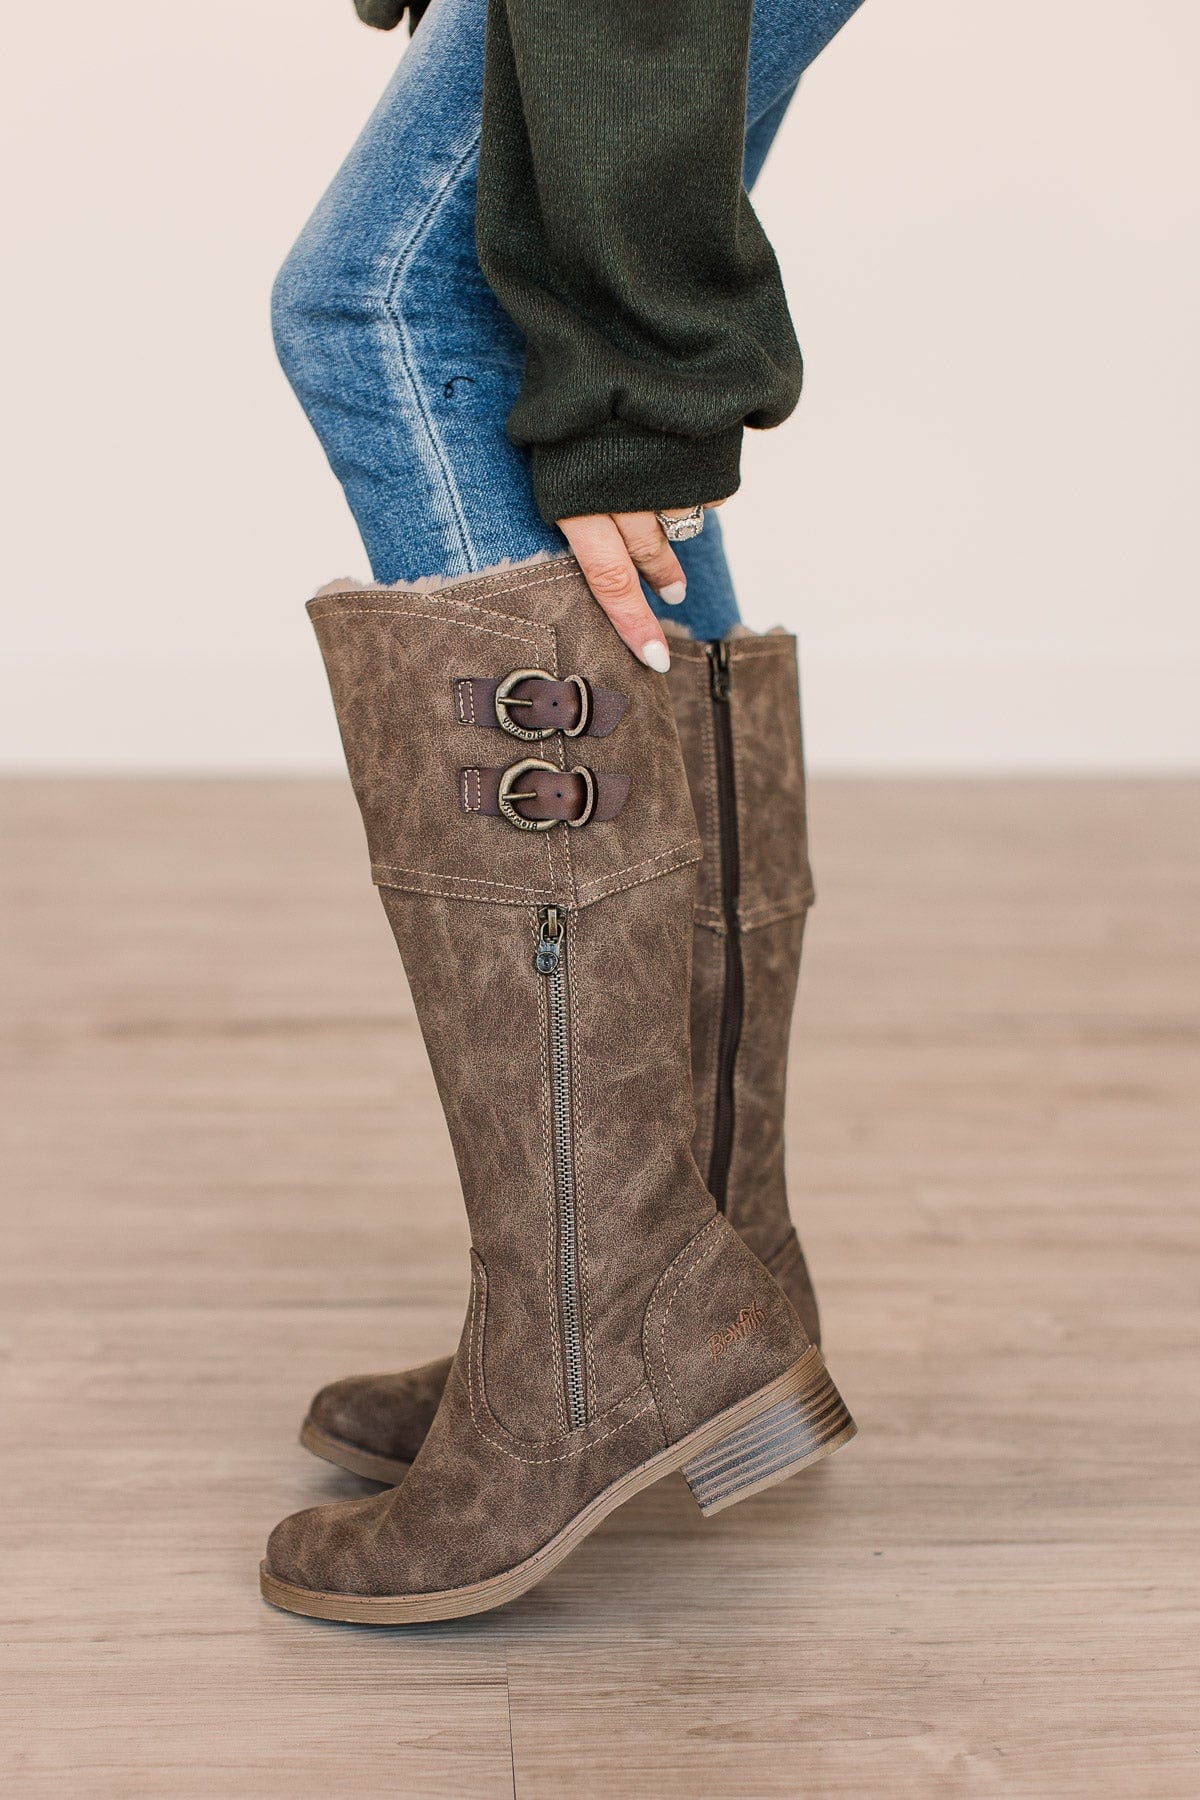 Blowfish Voss SHR Boots- Taupe Prospector